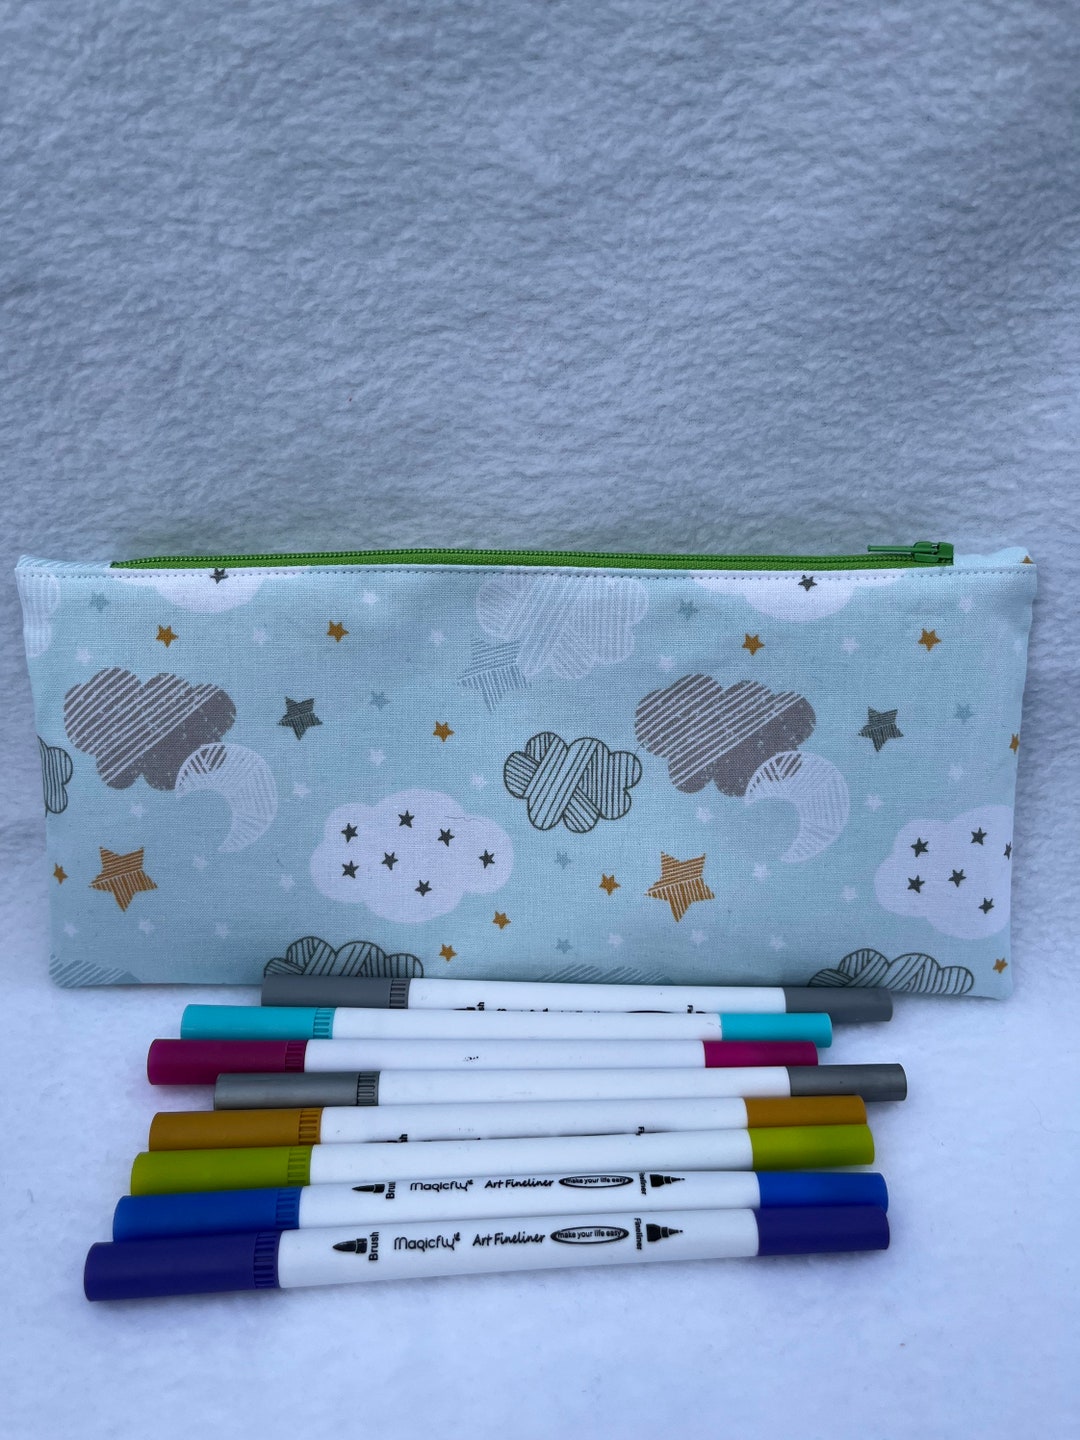 Handmade Fabric Pencil Case, Large Flat Pencil Case, Back to School, School  Pencil Case, College Pencil Case, Clouds, Water Resistant Lined 